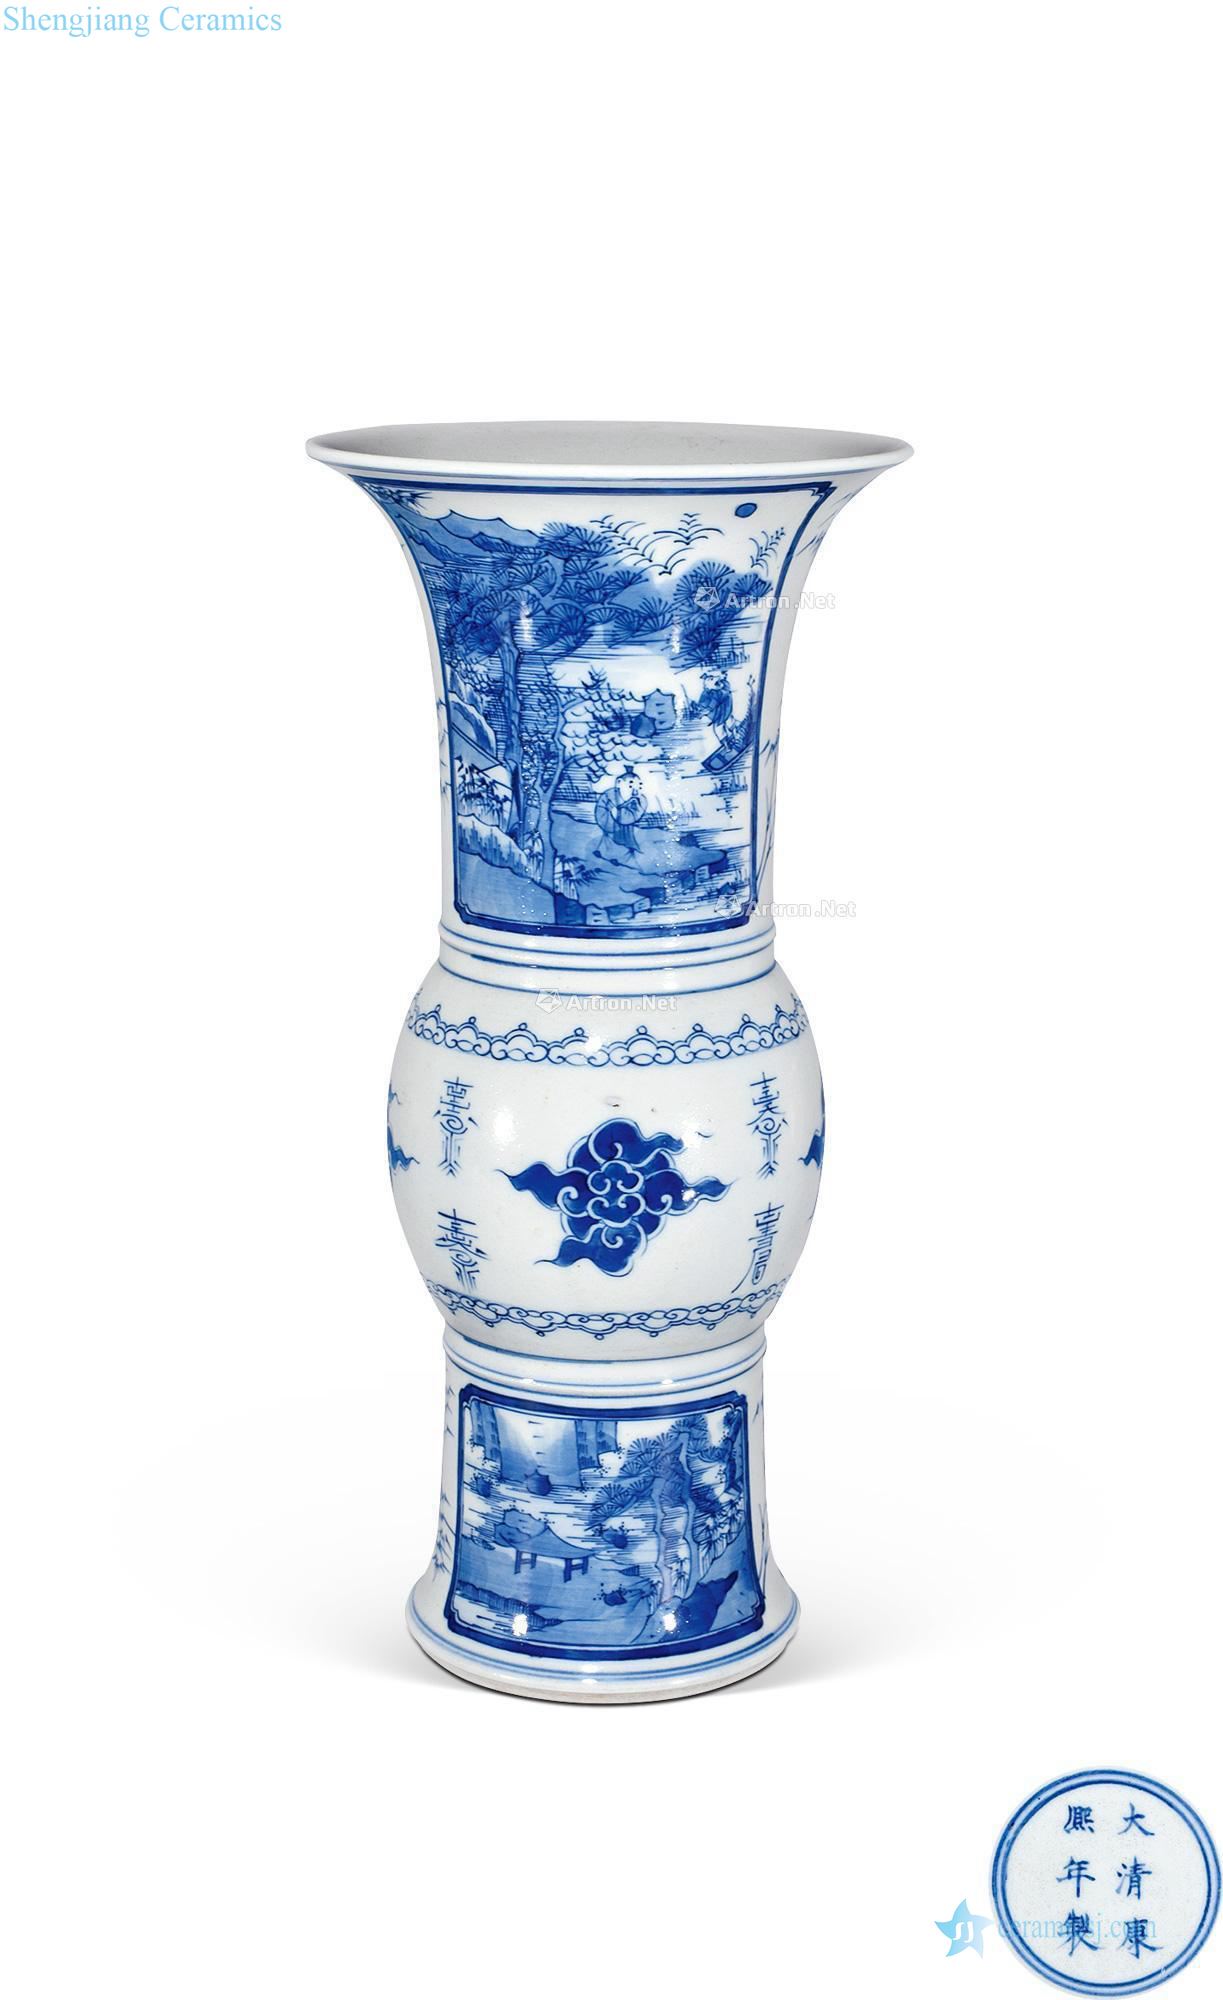 In the qing dynasty Blue and white flower vase with landscape characters